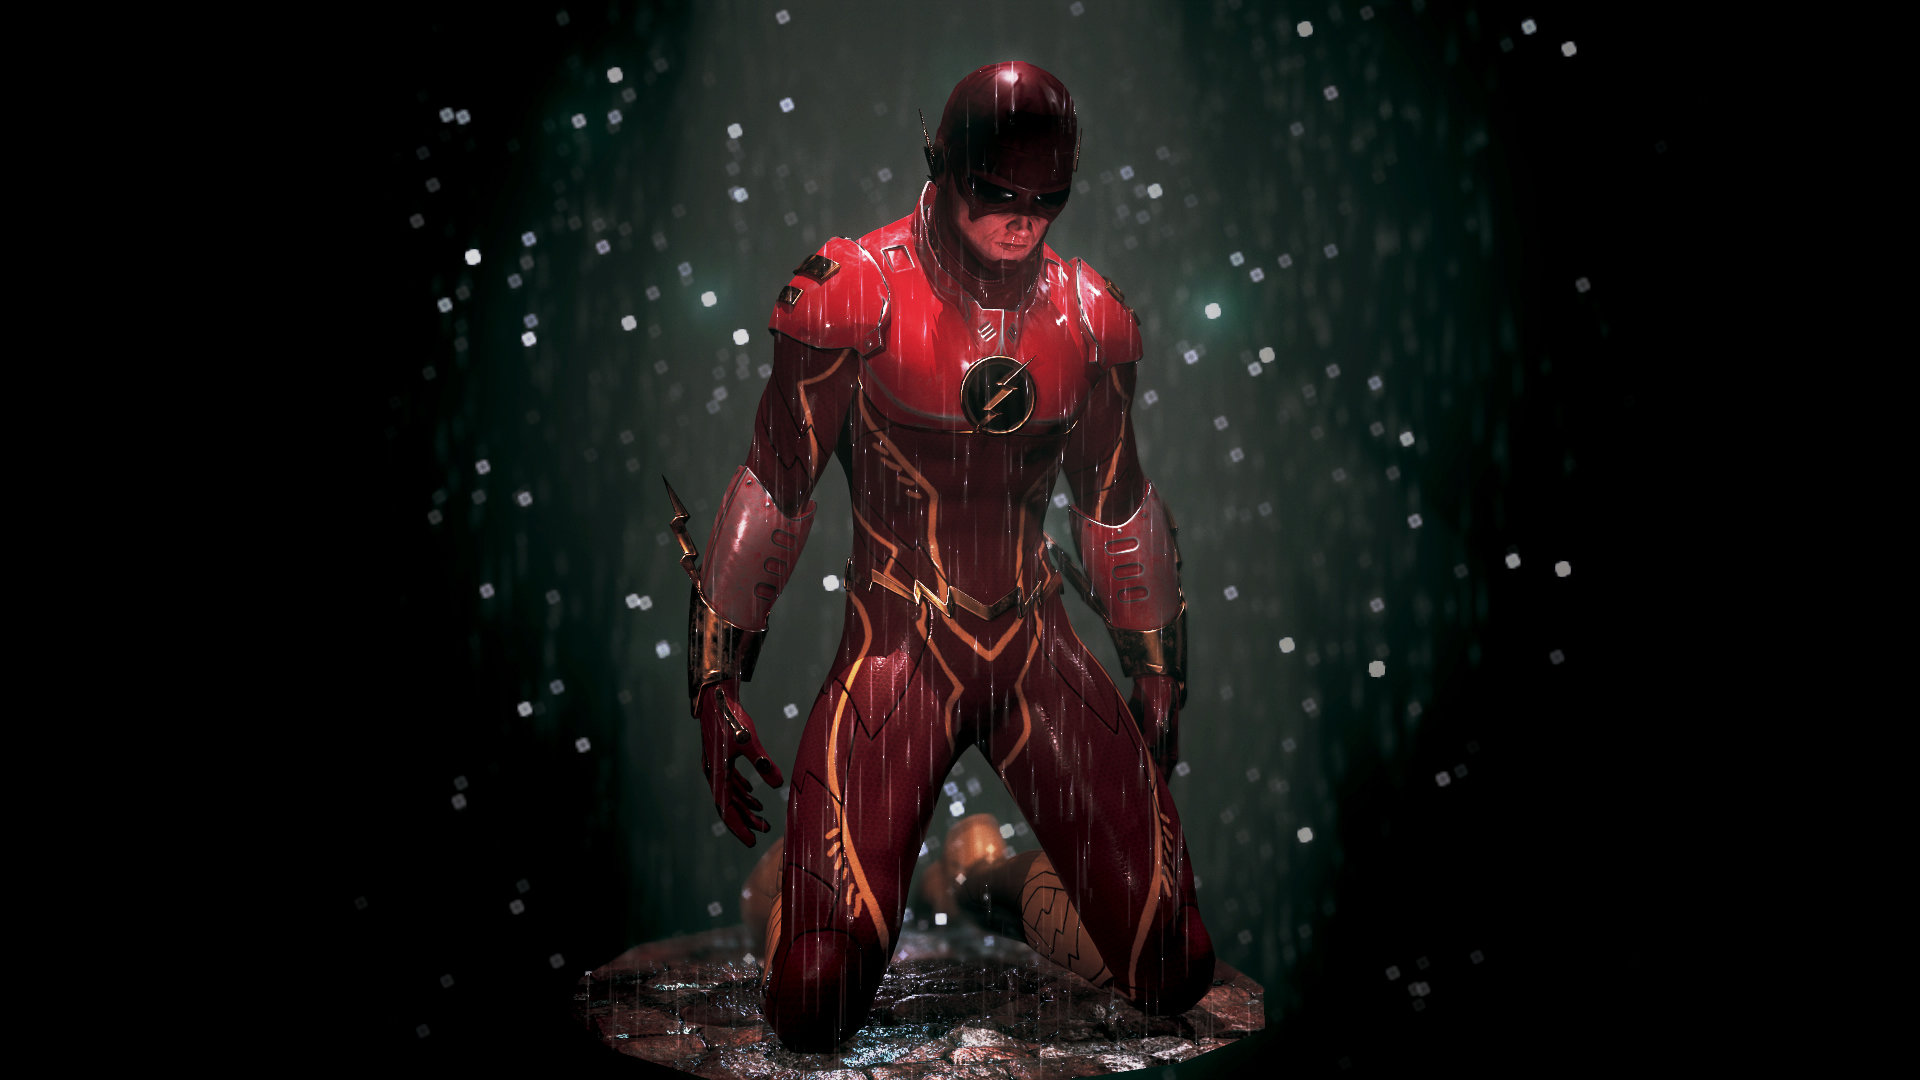 The Flash Art Wallpapers